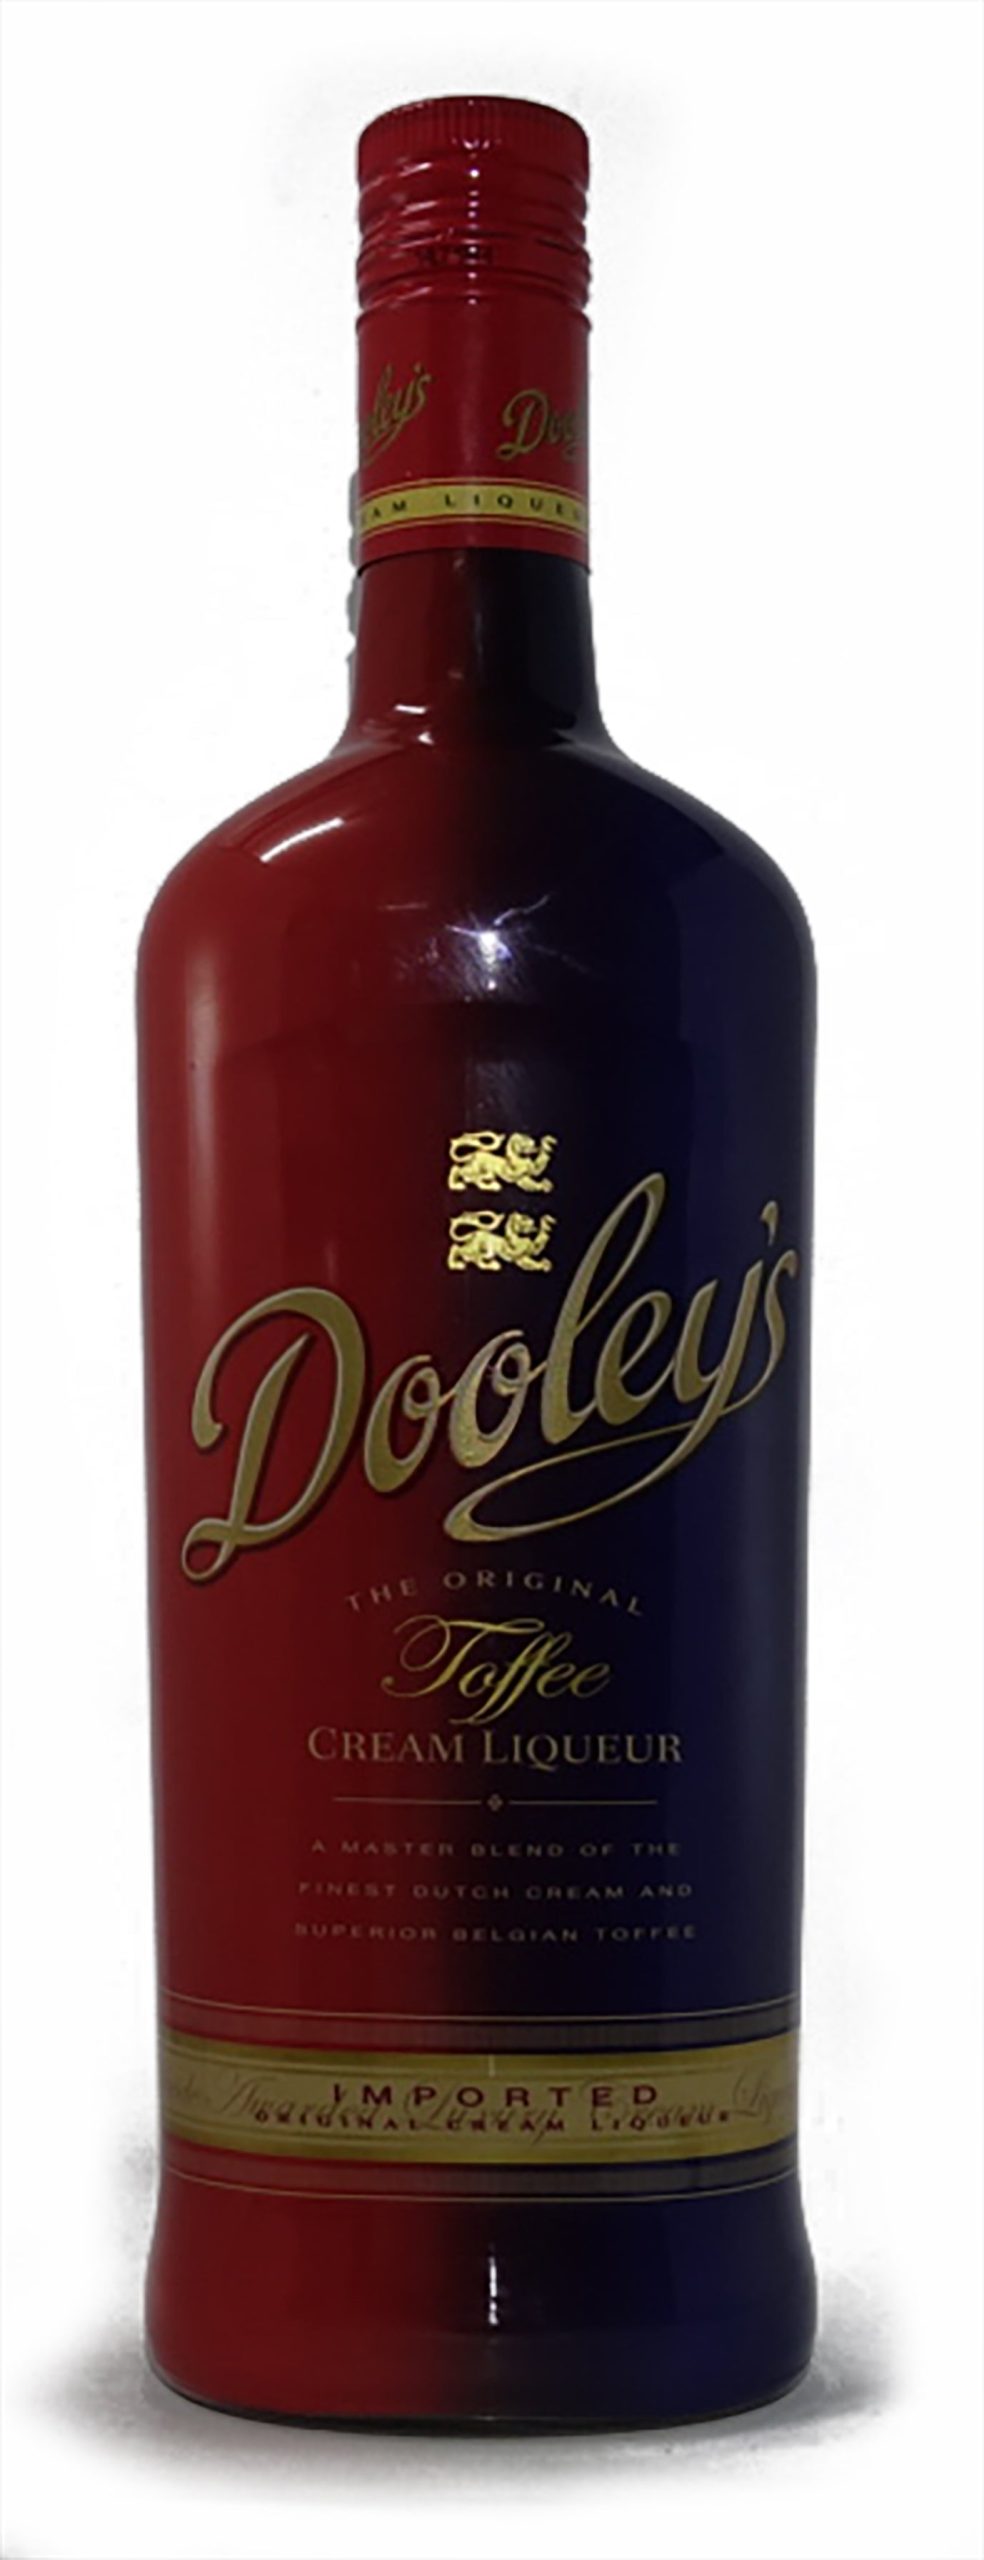 website Toffee at best Litre Copy Dooley\'s our find the of price Liqueur affordable Dooleys Cream 1 to most Visit the